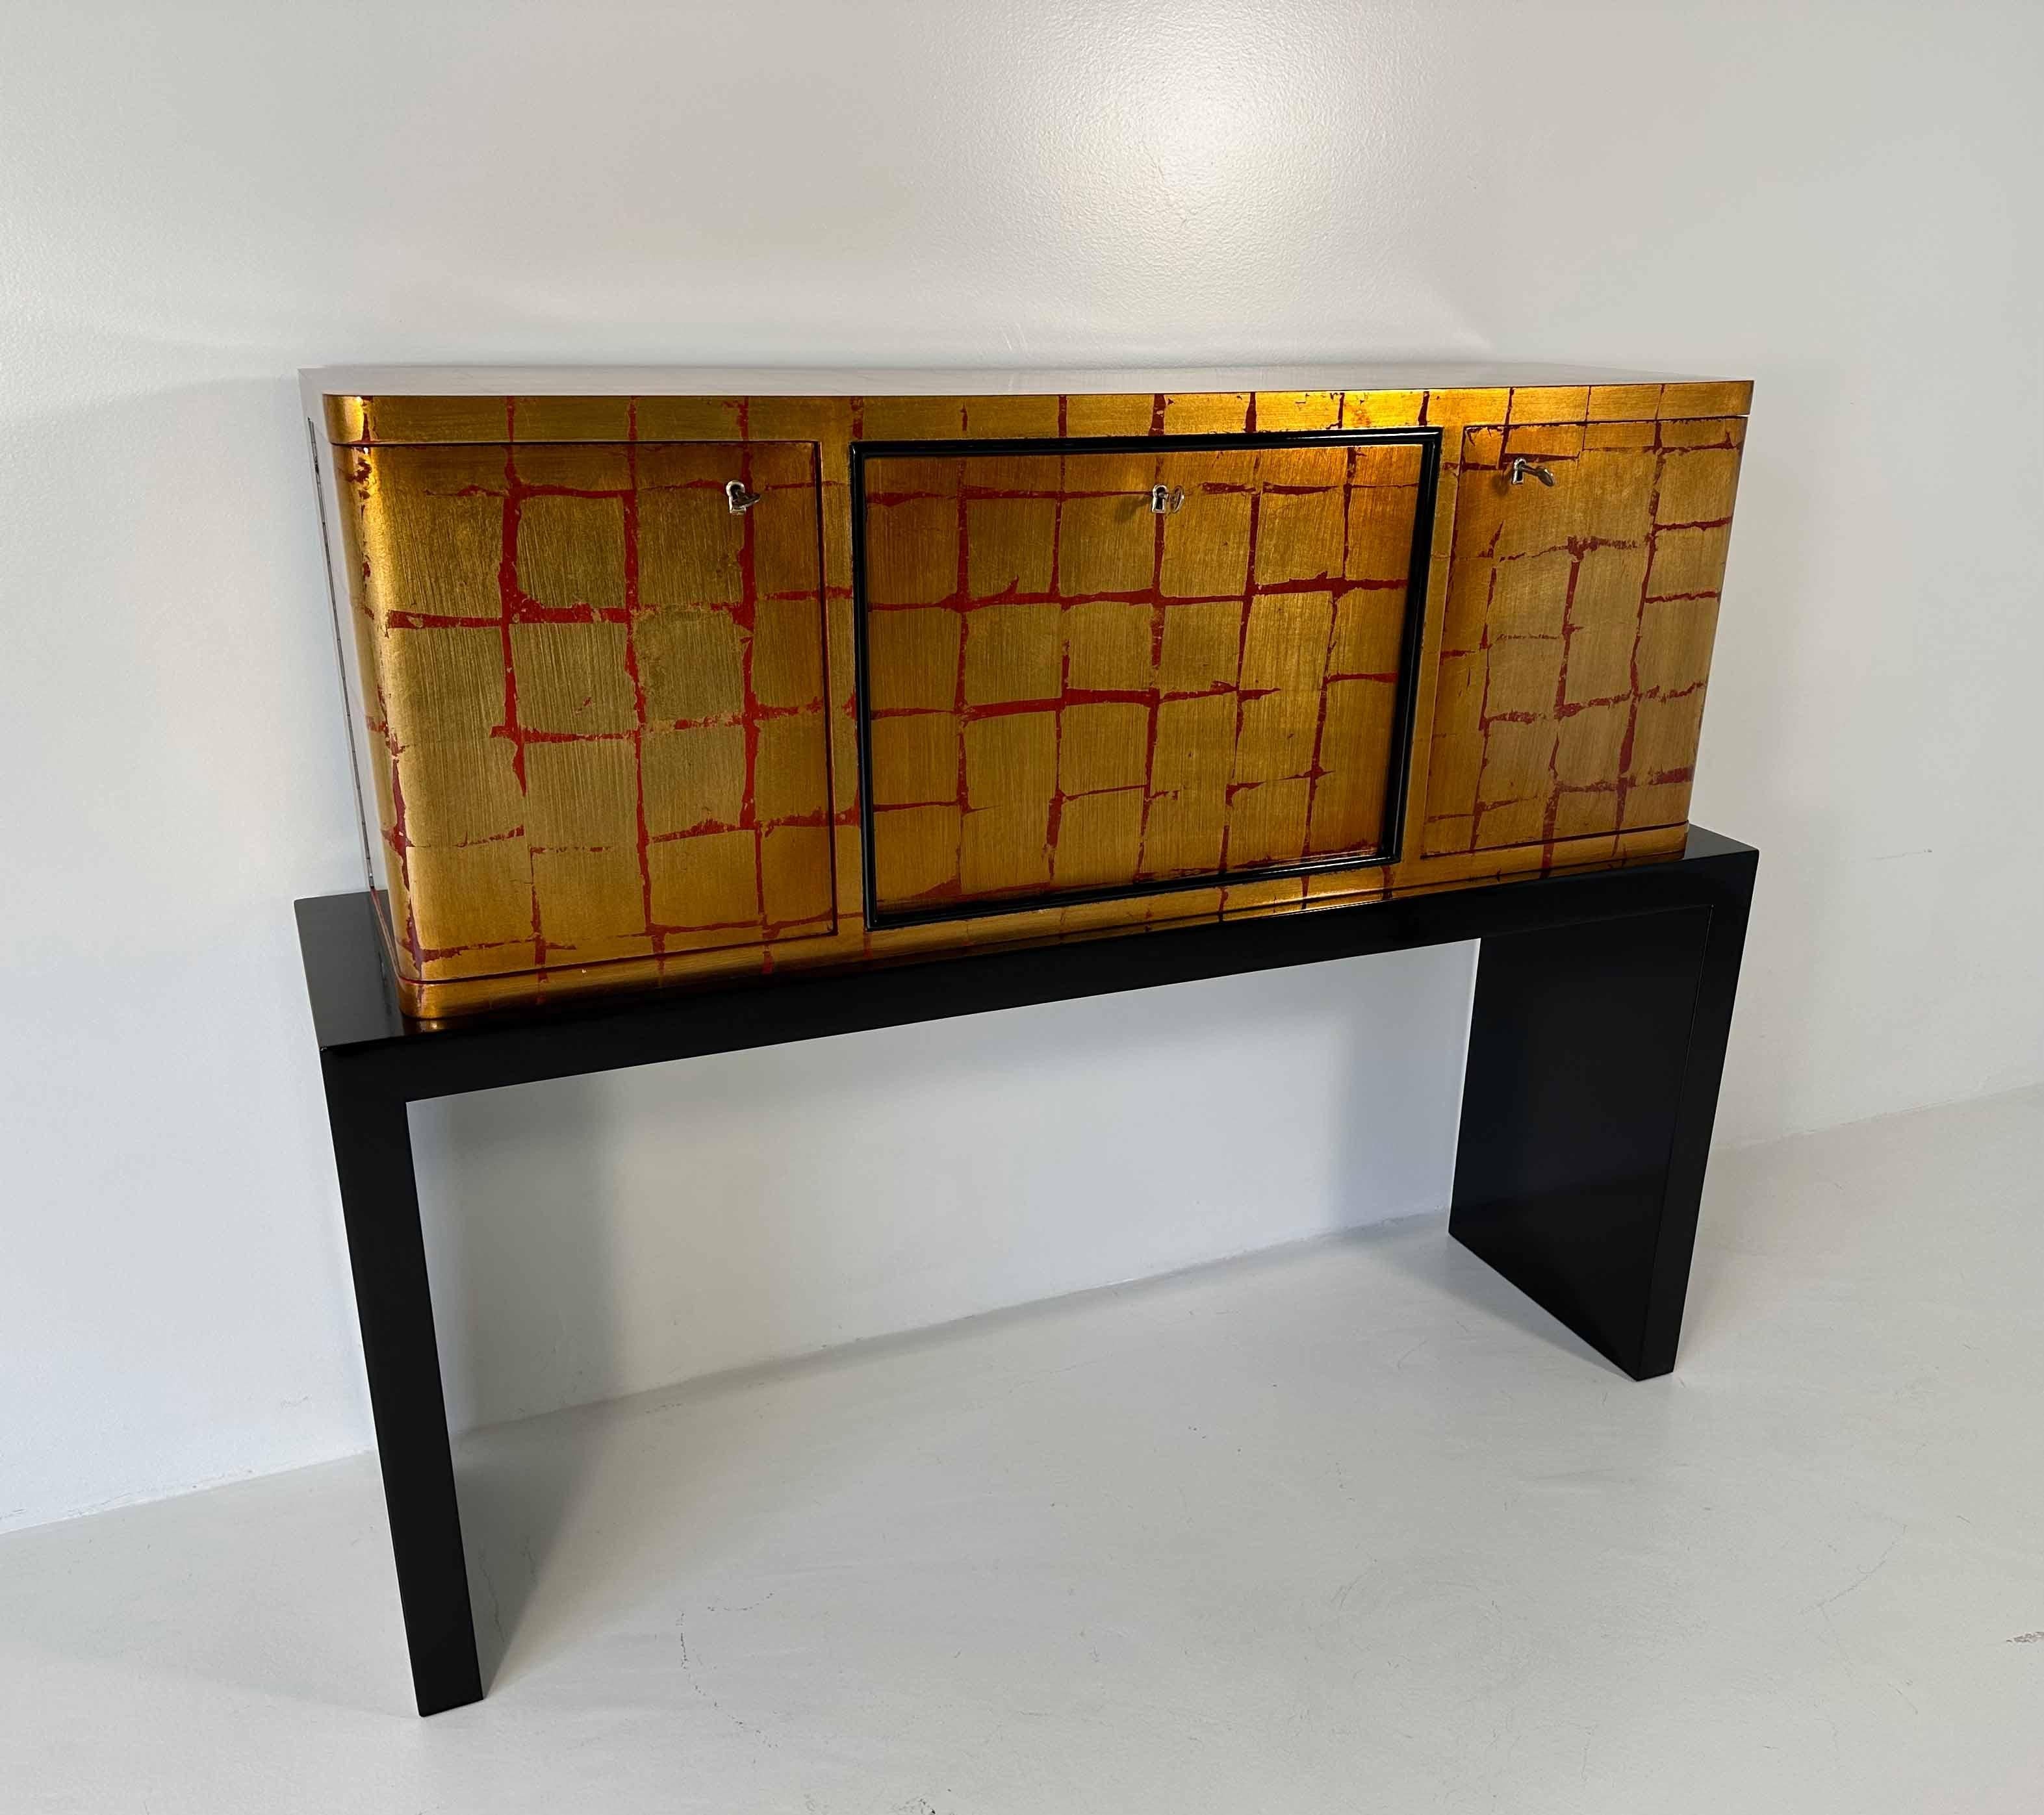 Italian Art Deco Red and Black Lacquer and Gold Leaf Cabinet, 1940s For Sale 1